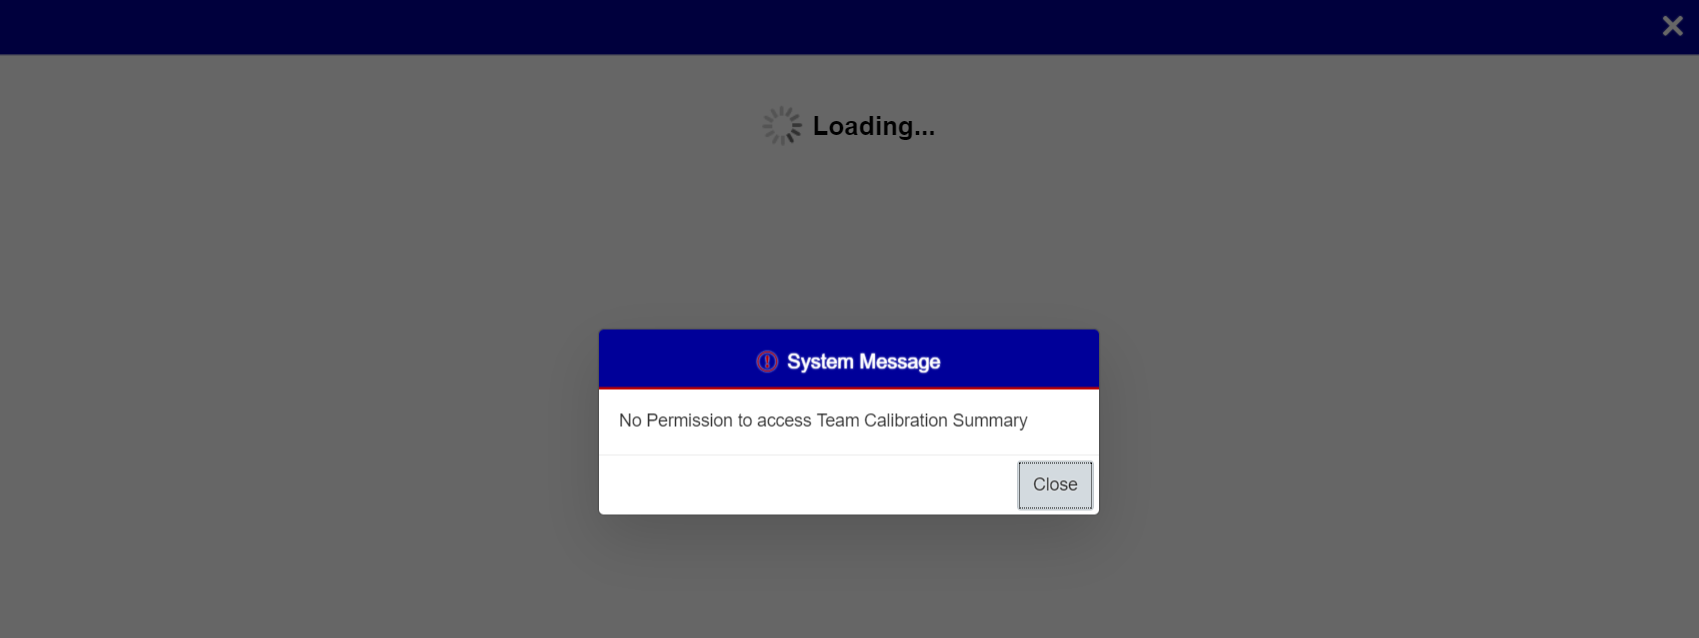 No Permission to access Team Calibration Summary tile.png